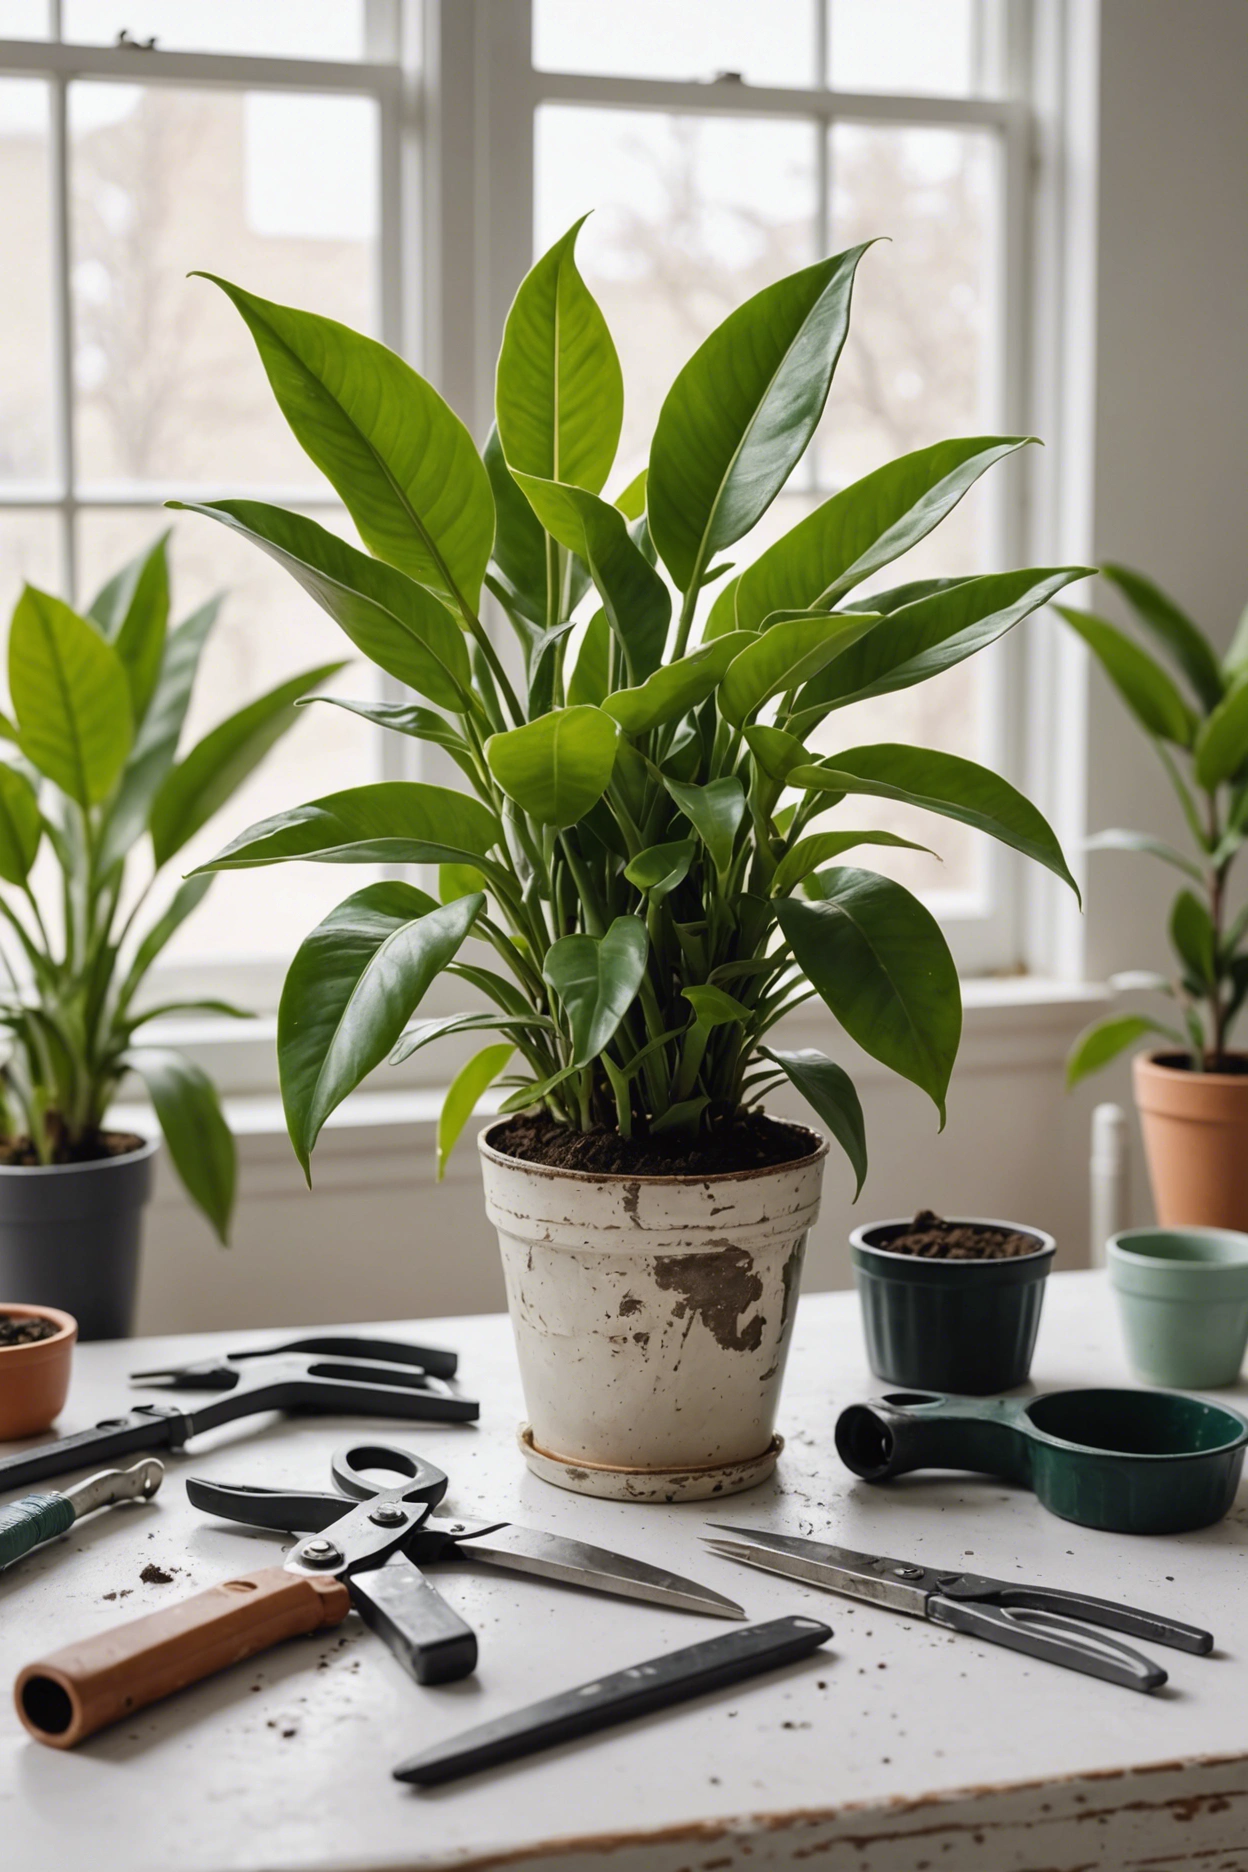 "A distressed ZZ plant with wilting, dull leaves on a light table, surrounded by plant care tools like pruning shears, soil, and fertilizer."